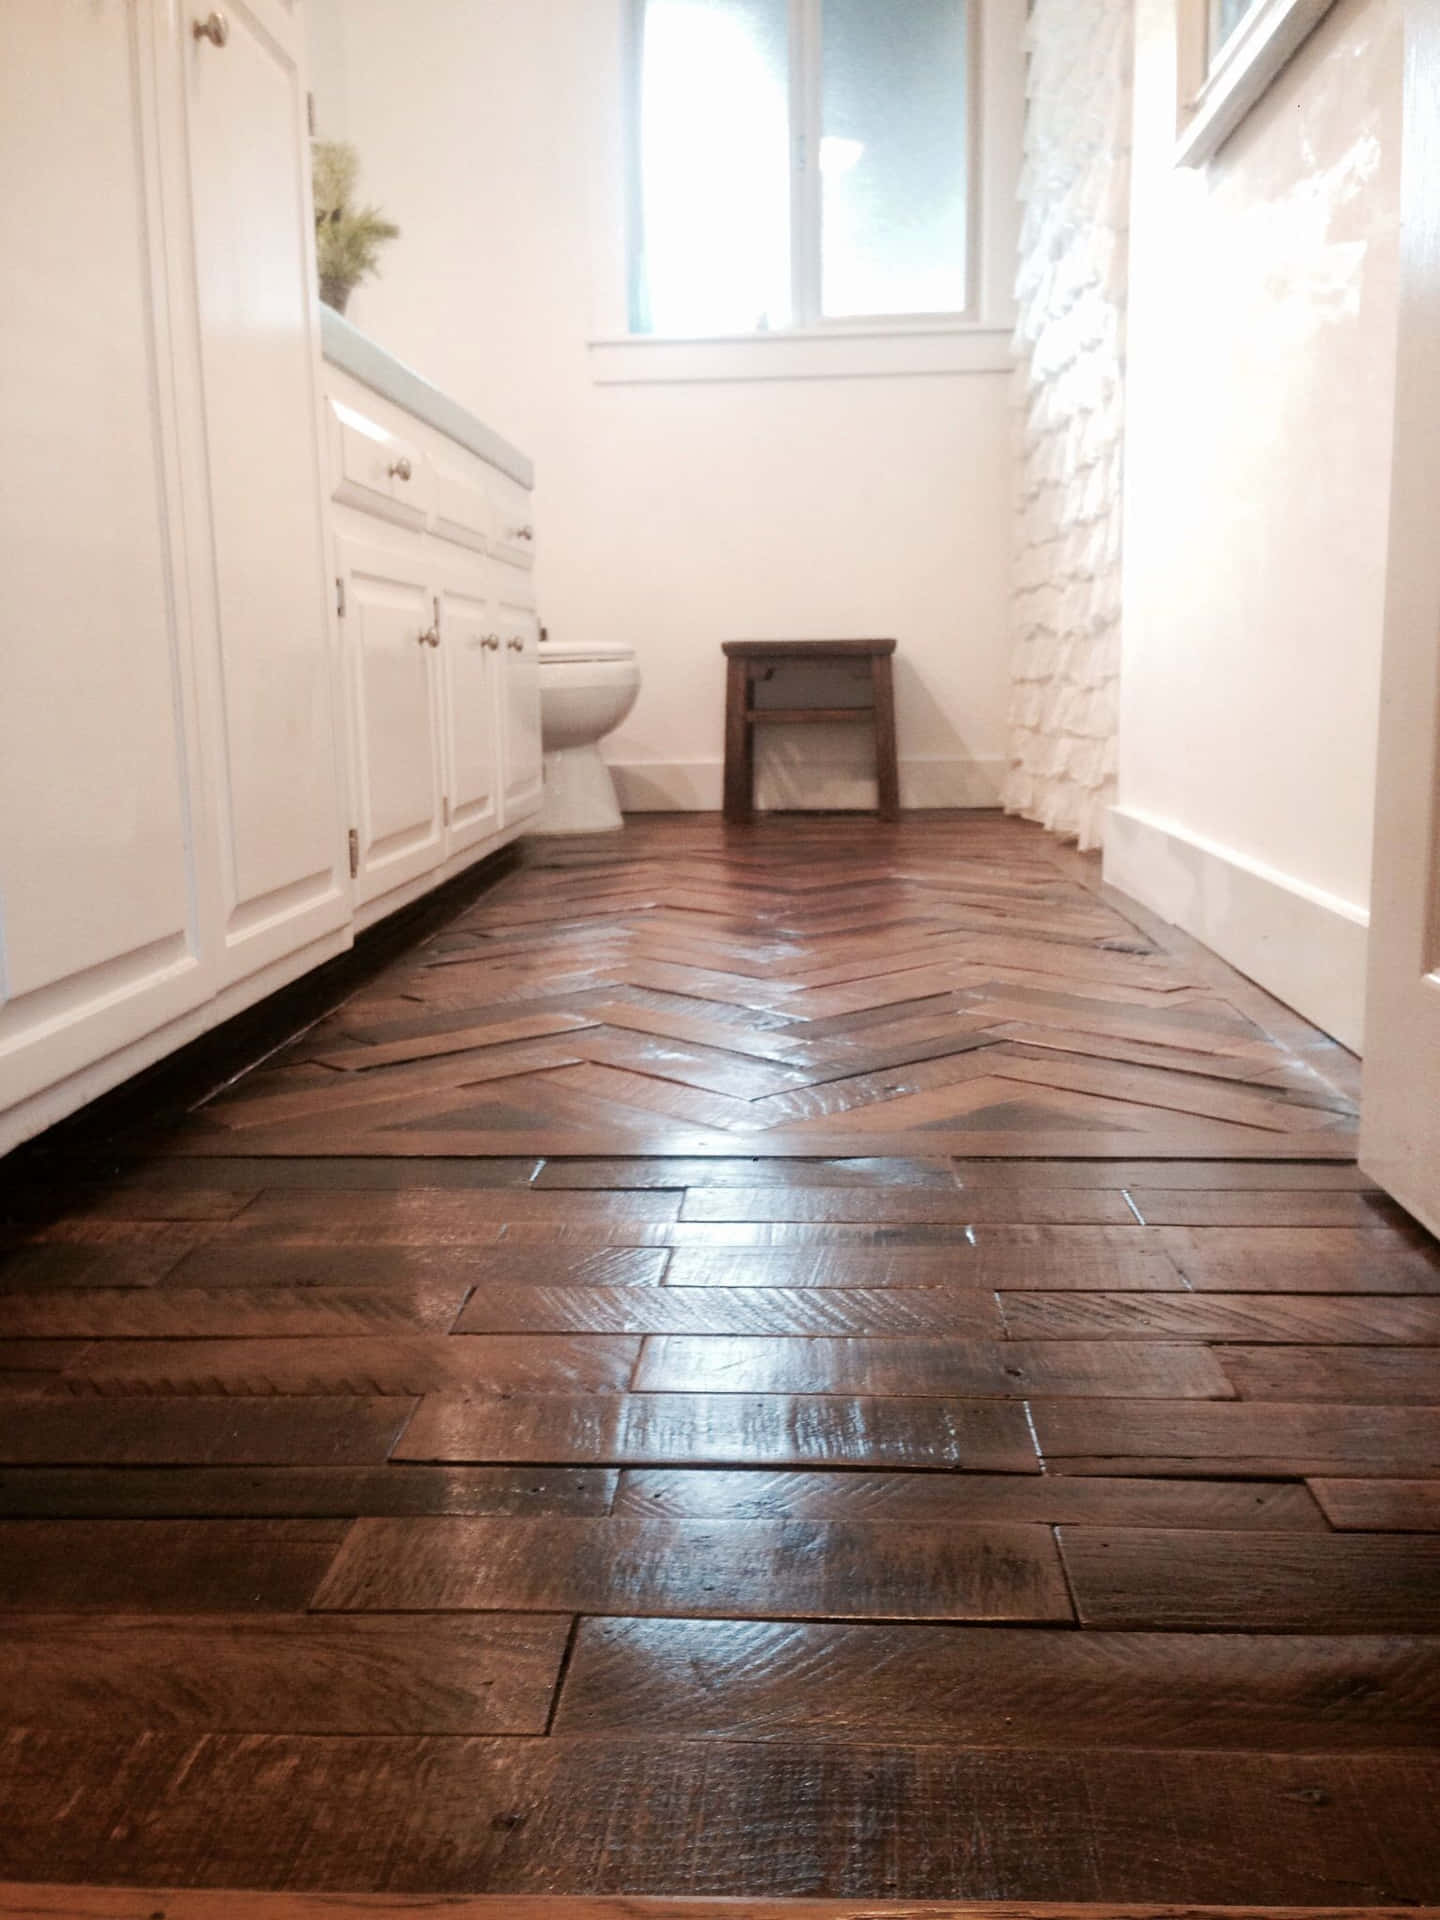 A Bathroom With A Wooden Floor